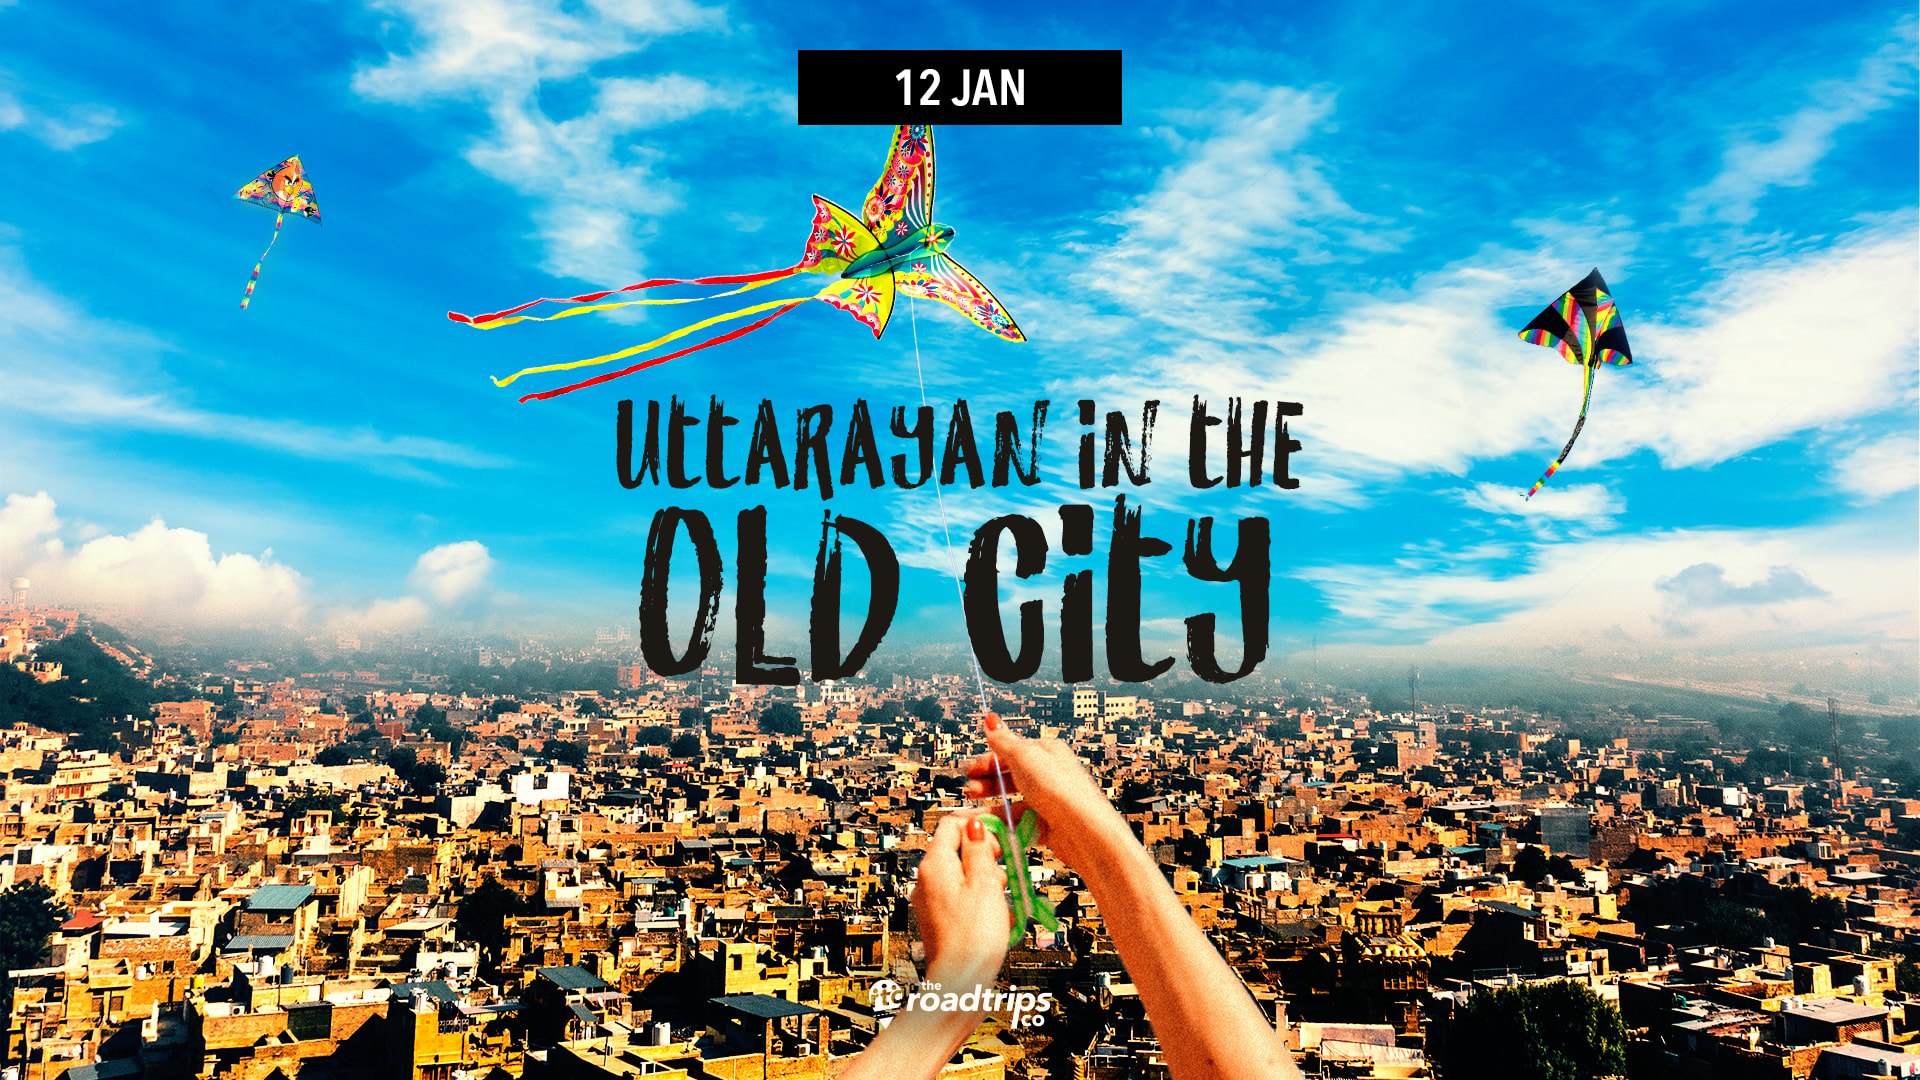 https://creativeyatra.com/wp-content/uploads/2020/01/Uttarayan-in-the-Old-City-Sprint-by-RTCAhmedabad.jpg